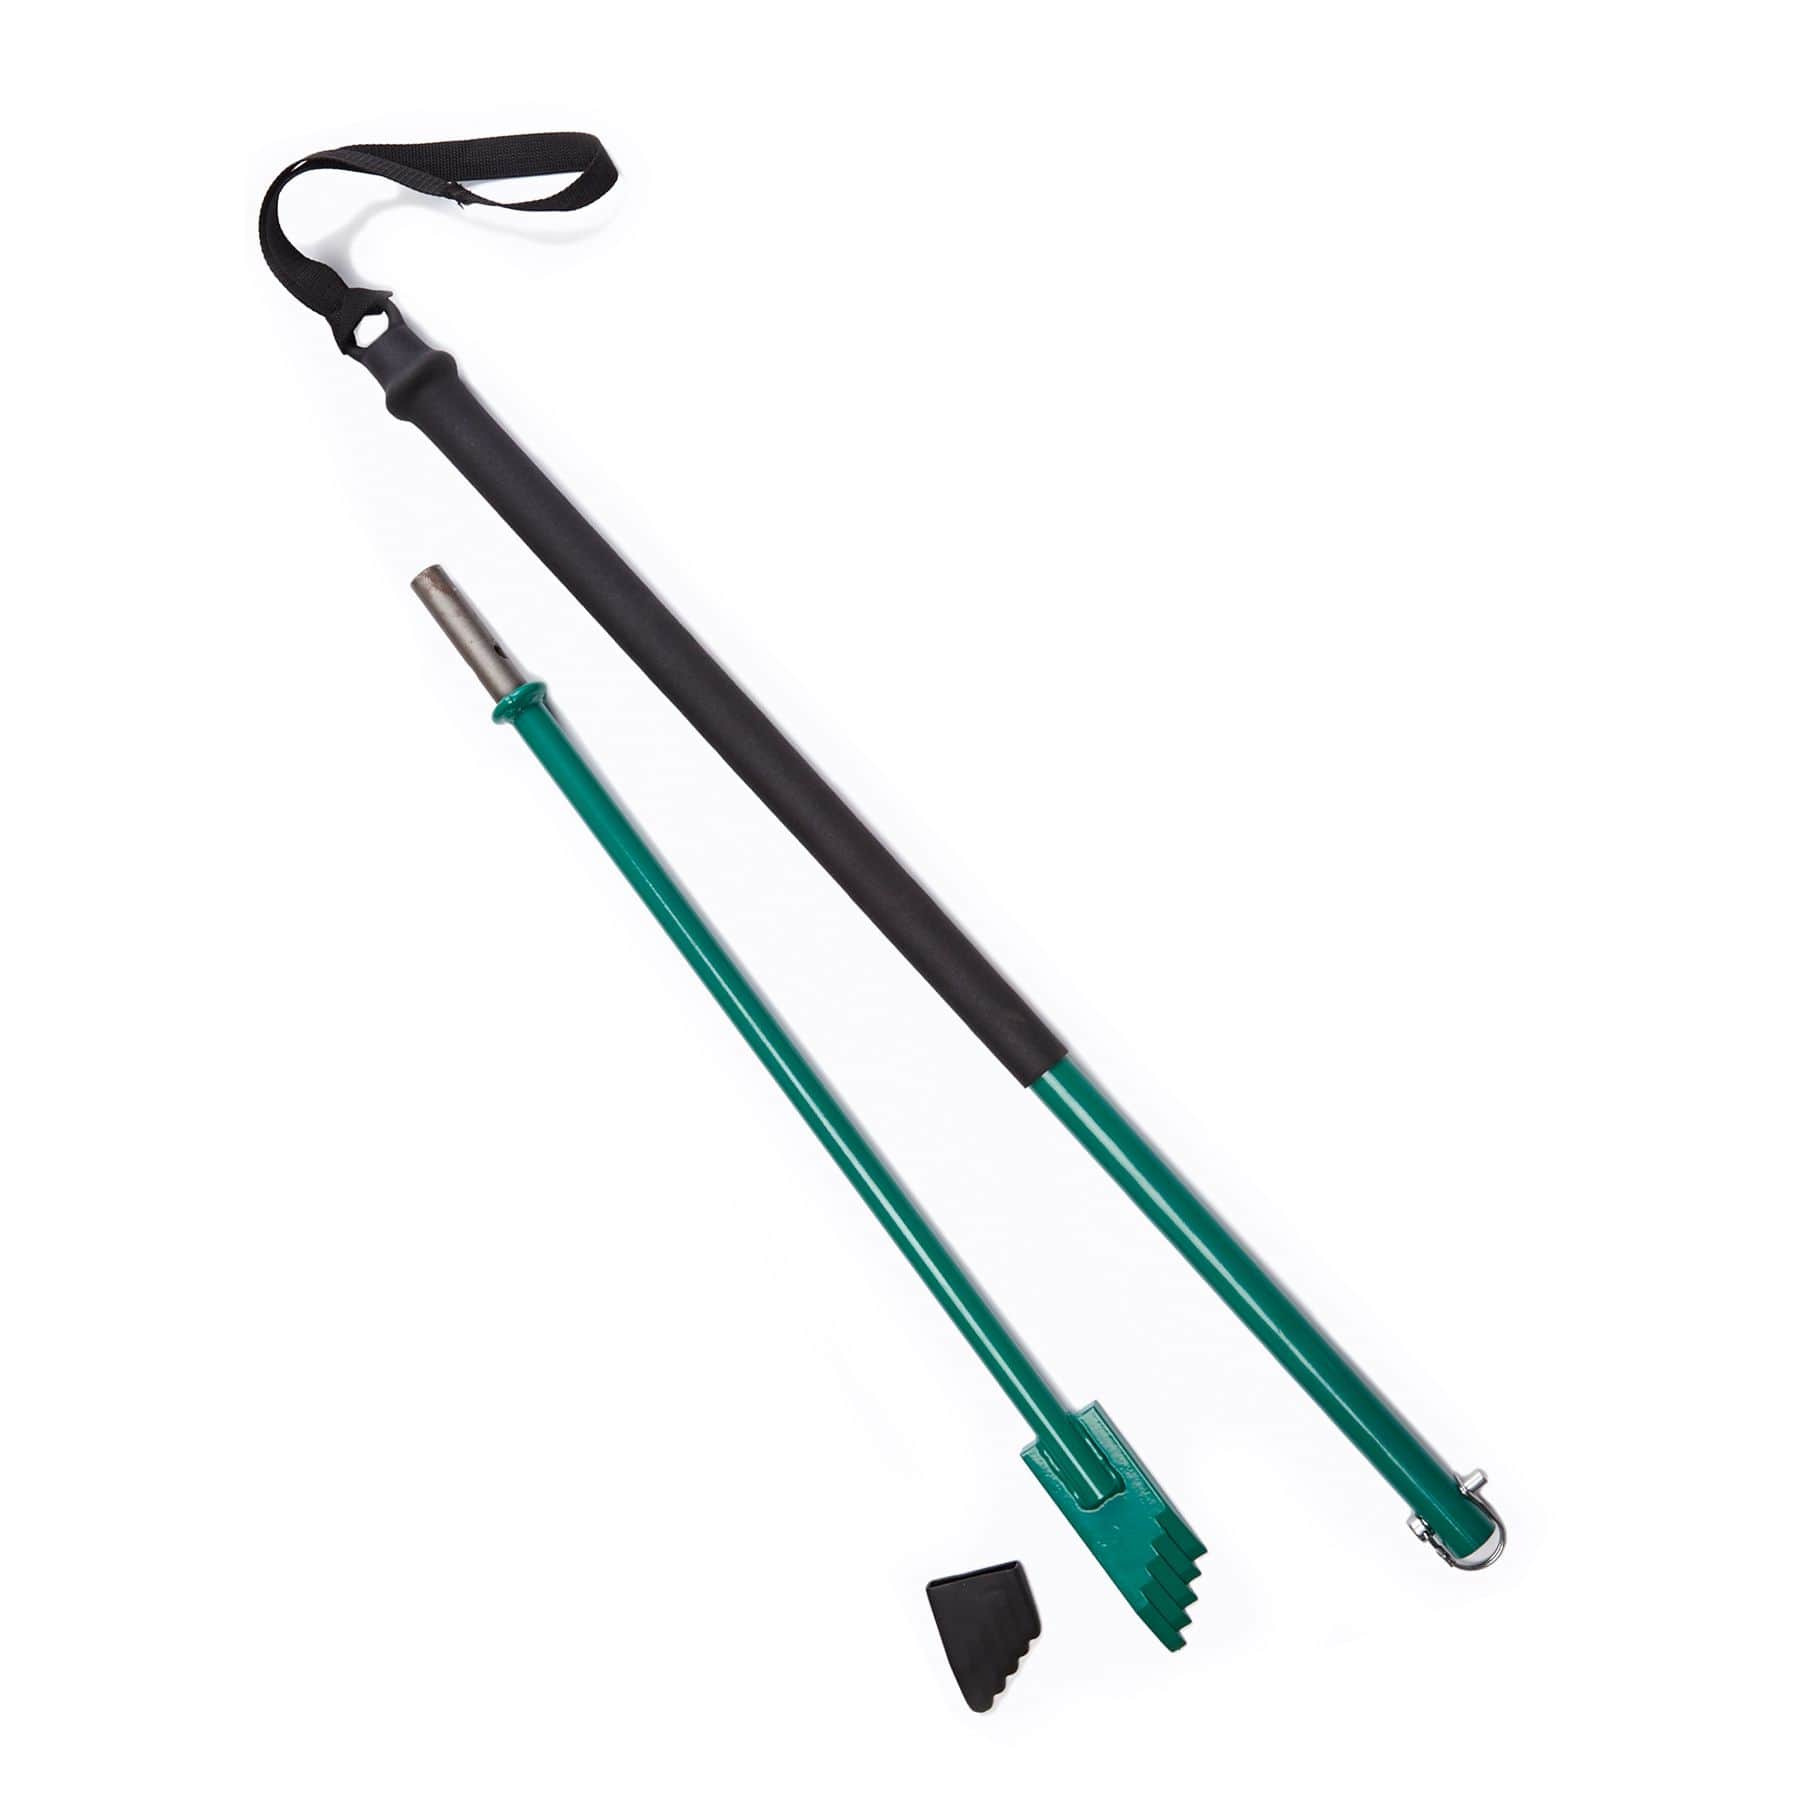 https://media-www.canadiantire.ca/product/playing/fishing/ice-fishing/0777375/woods-ice-chisel-2-piece-3067526c-bcec-4ff2-9190-8f164a6da276-jpgrendition.jpg